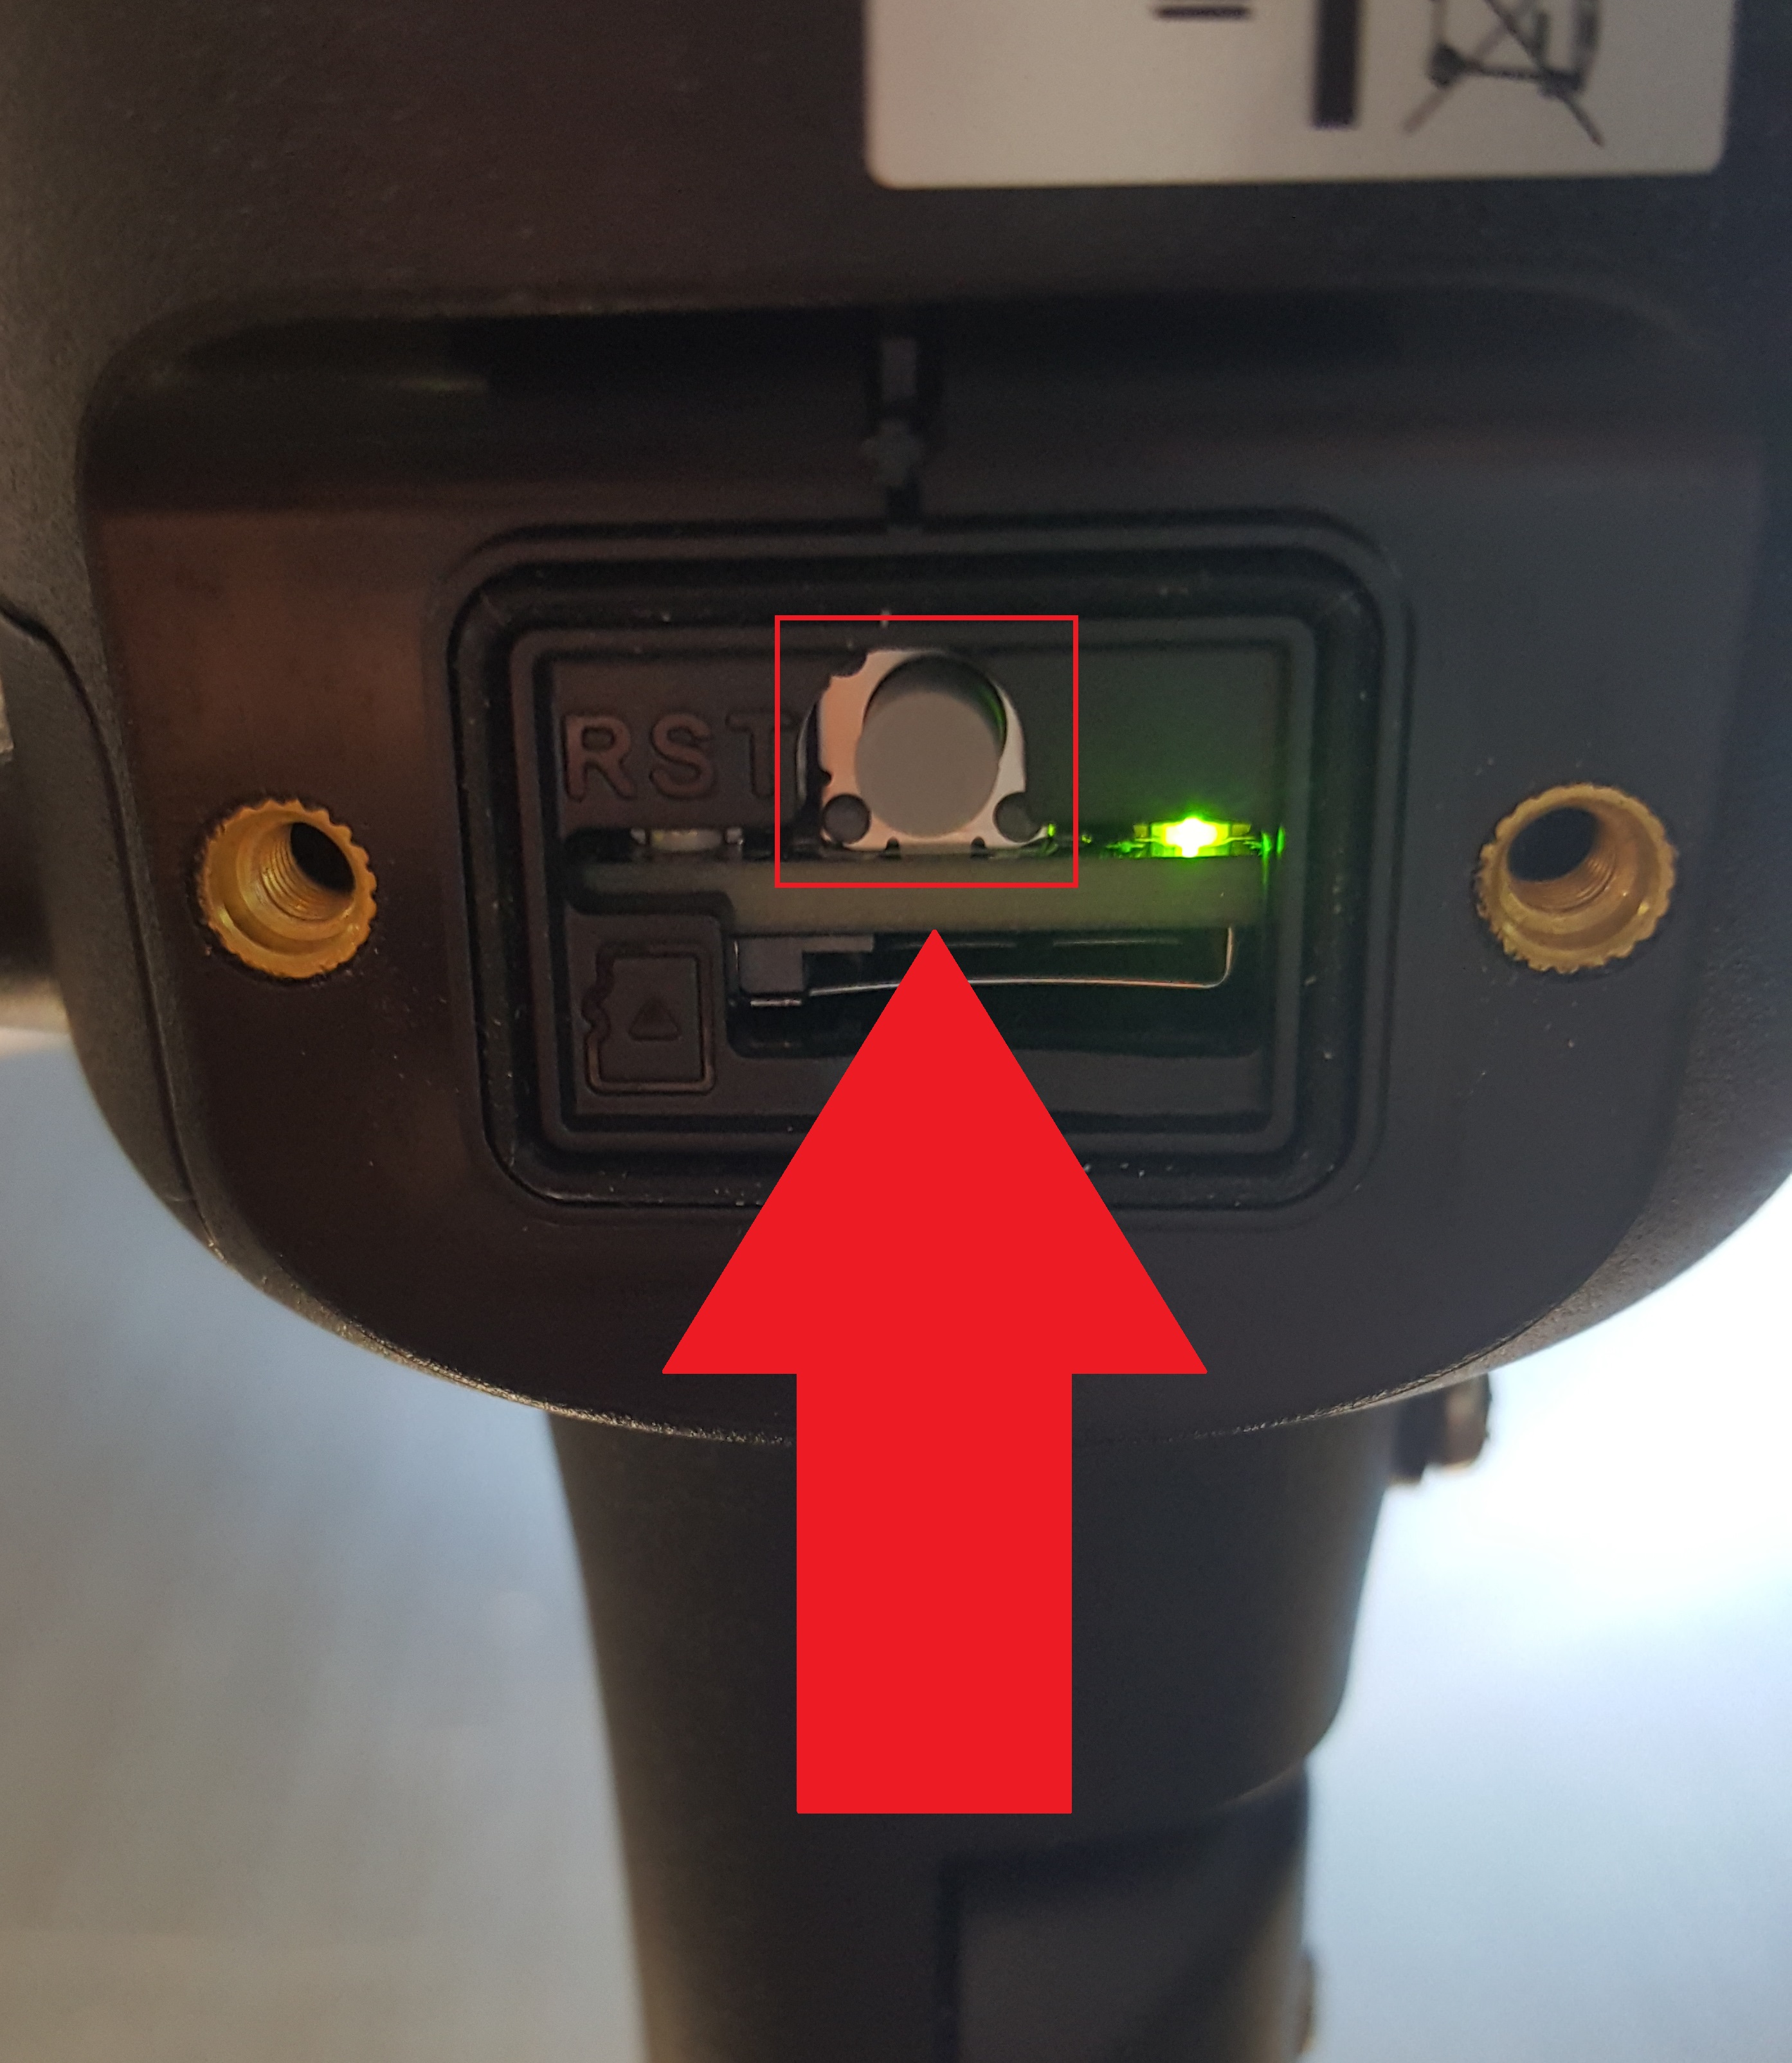 How To Reset Blink Camera To Factory Settings